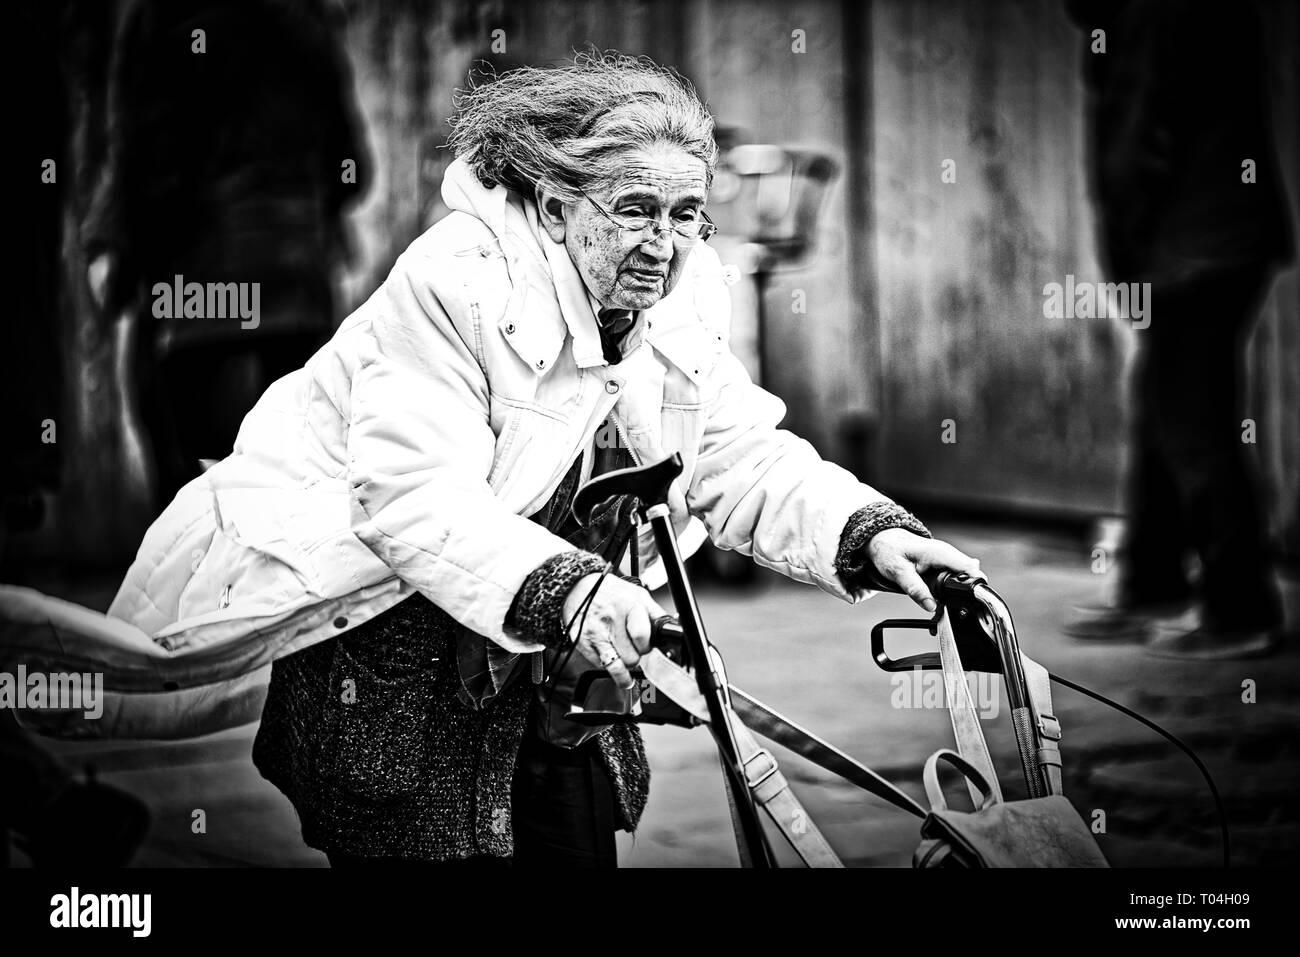 Street Portraits in Black and White Dramatic Stock Photo